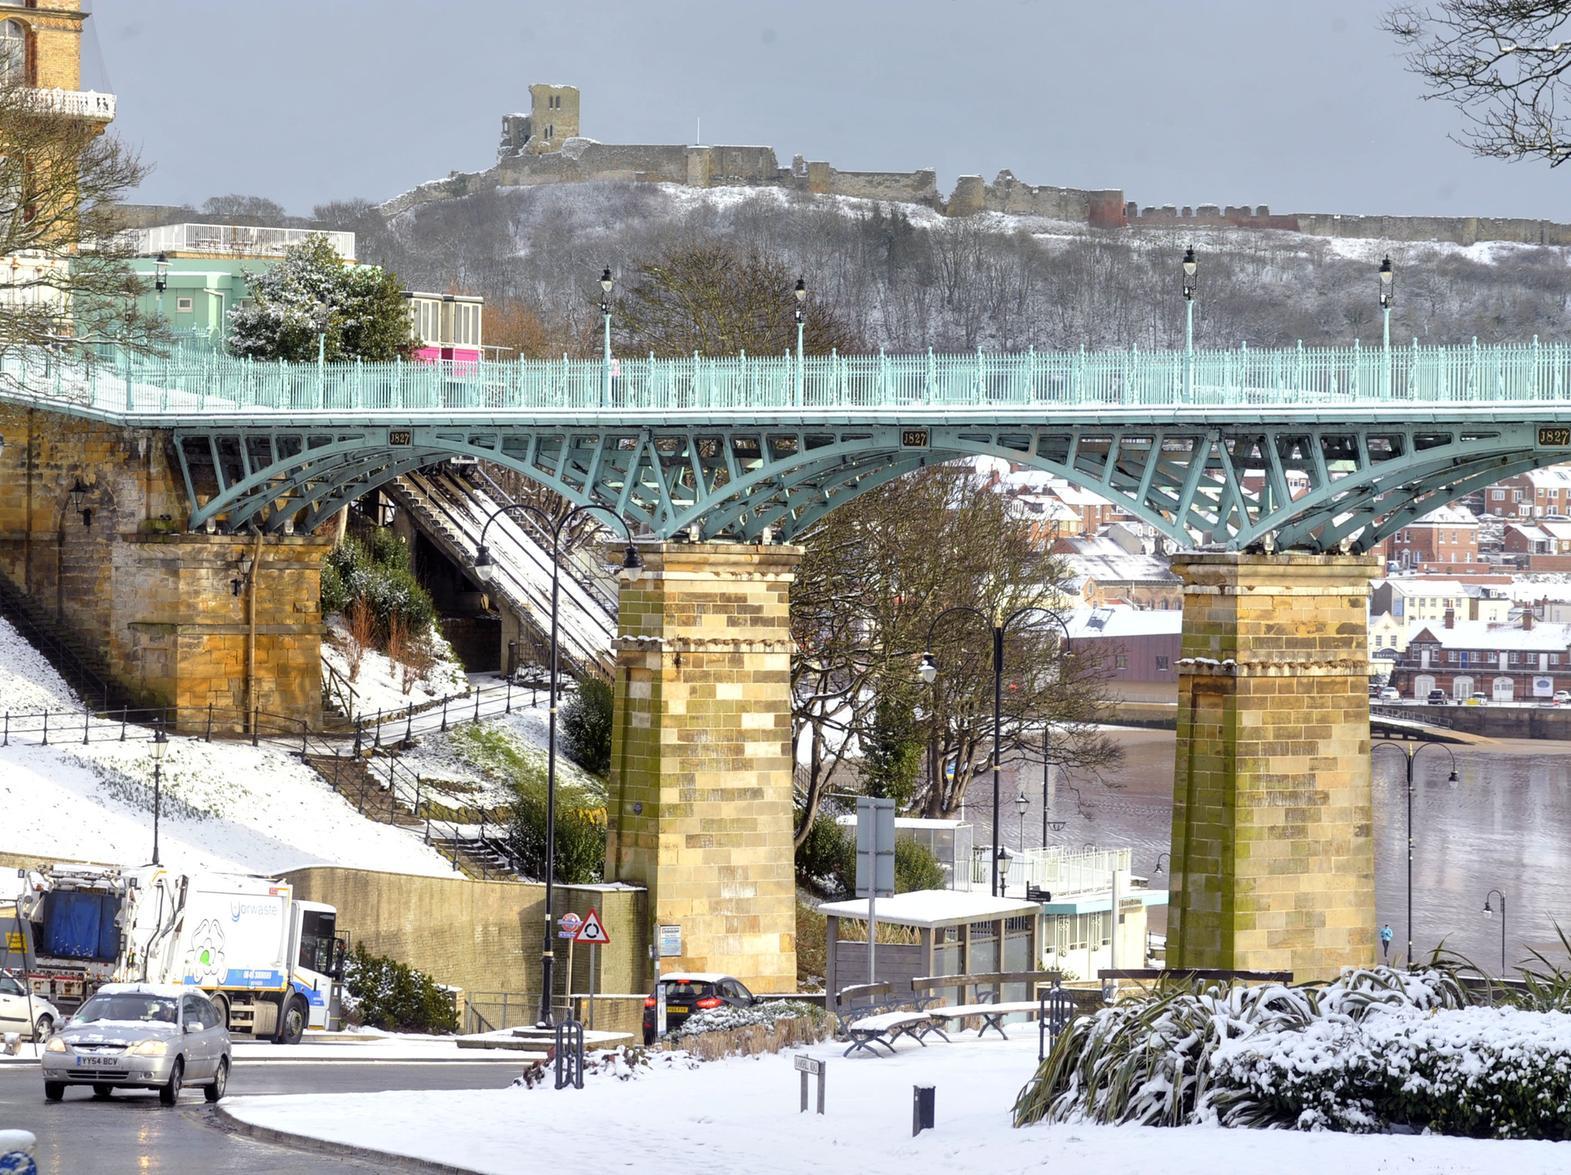 A view of the Spa Bridge and South Bay covered in snow.